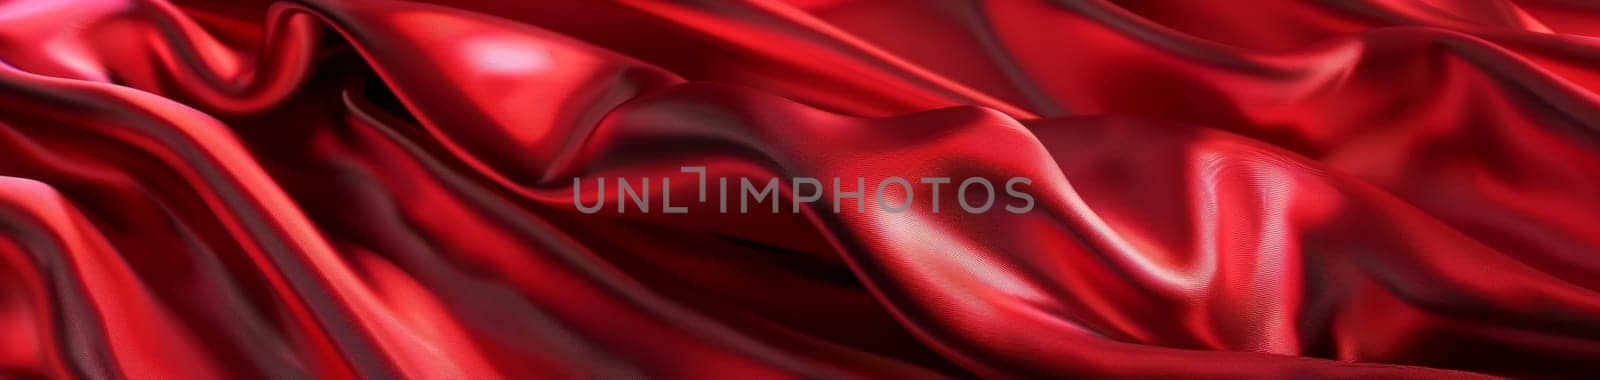 A stunning visual of lustrous red satin drapery, capturing the essence of luxury with its vibrant color and smooth texture. by sfinks